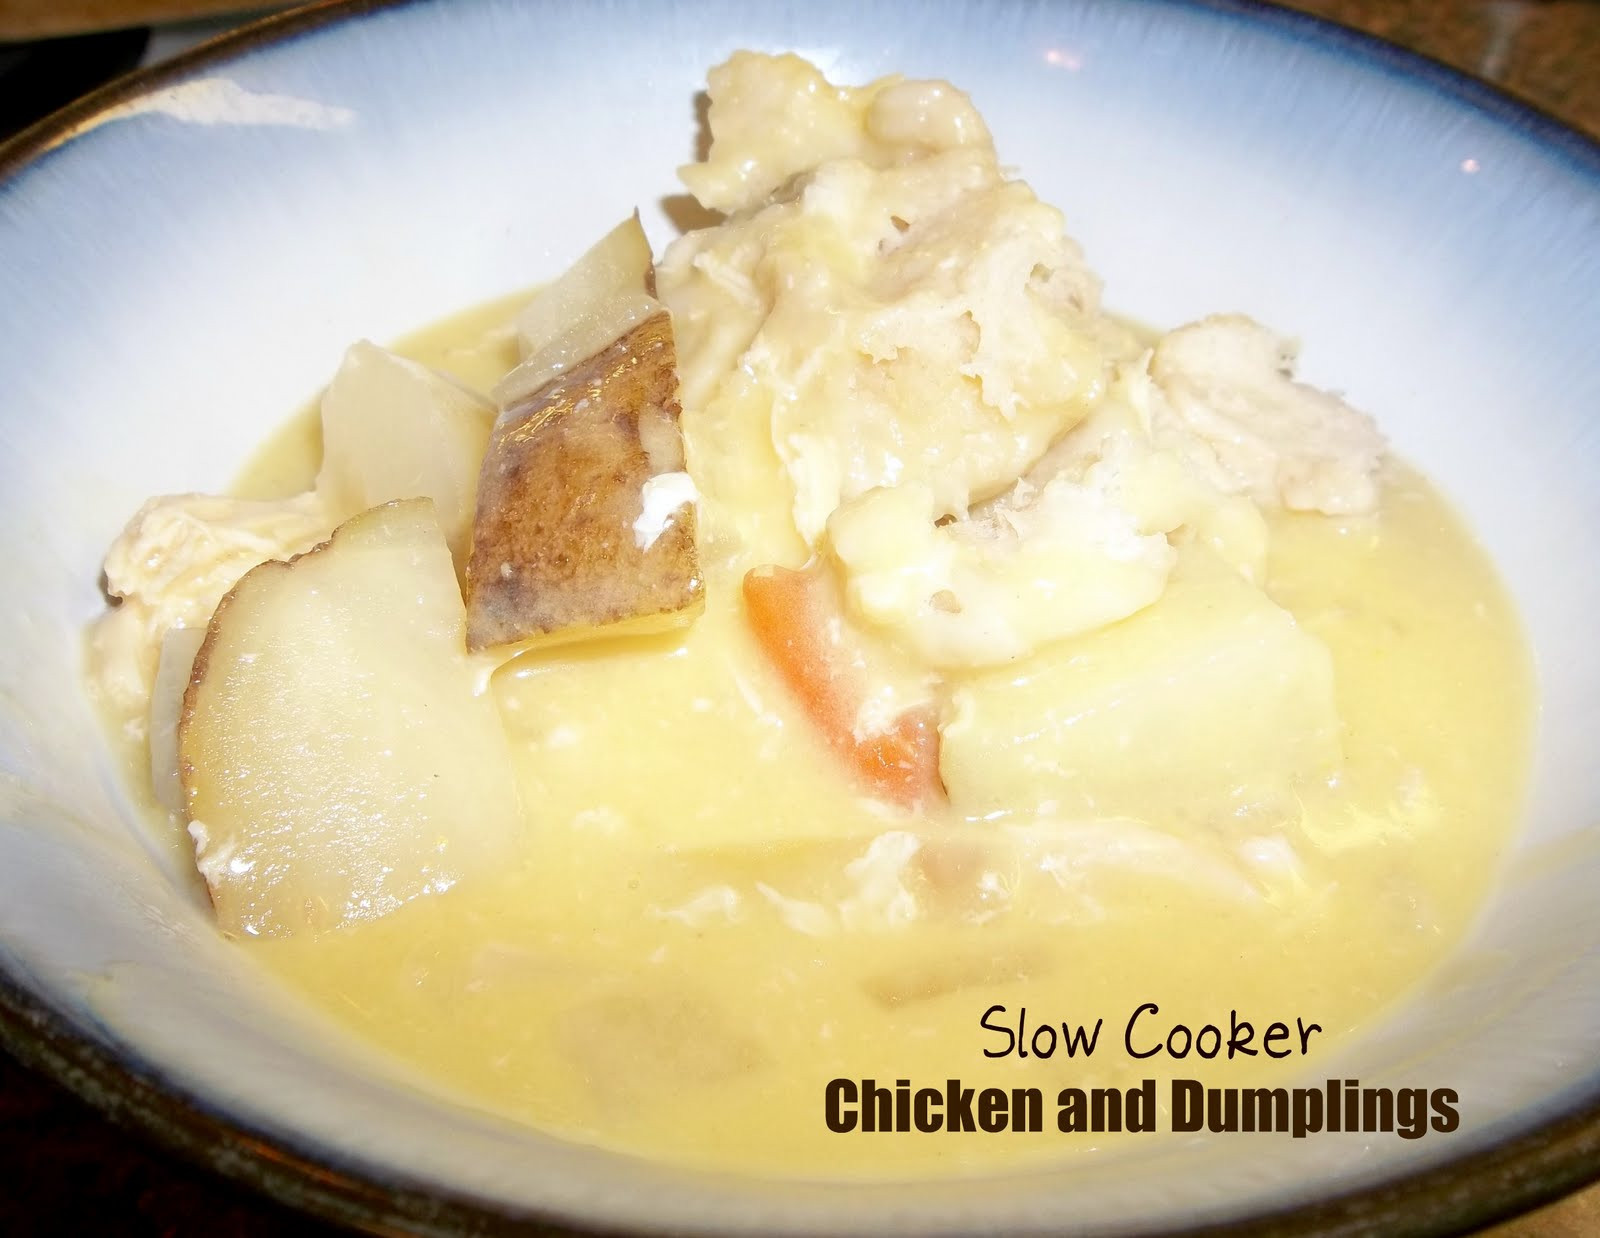 Slow Cooker Chicken and Dumplings Healthy the 20 Best Ideas for Healthy Meals Monday Slow Cooker Chicken and Dumplings